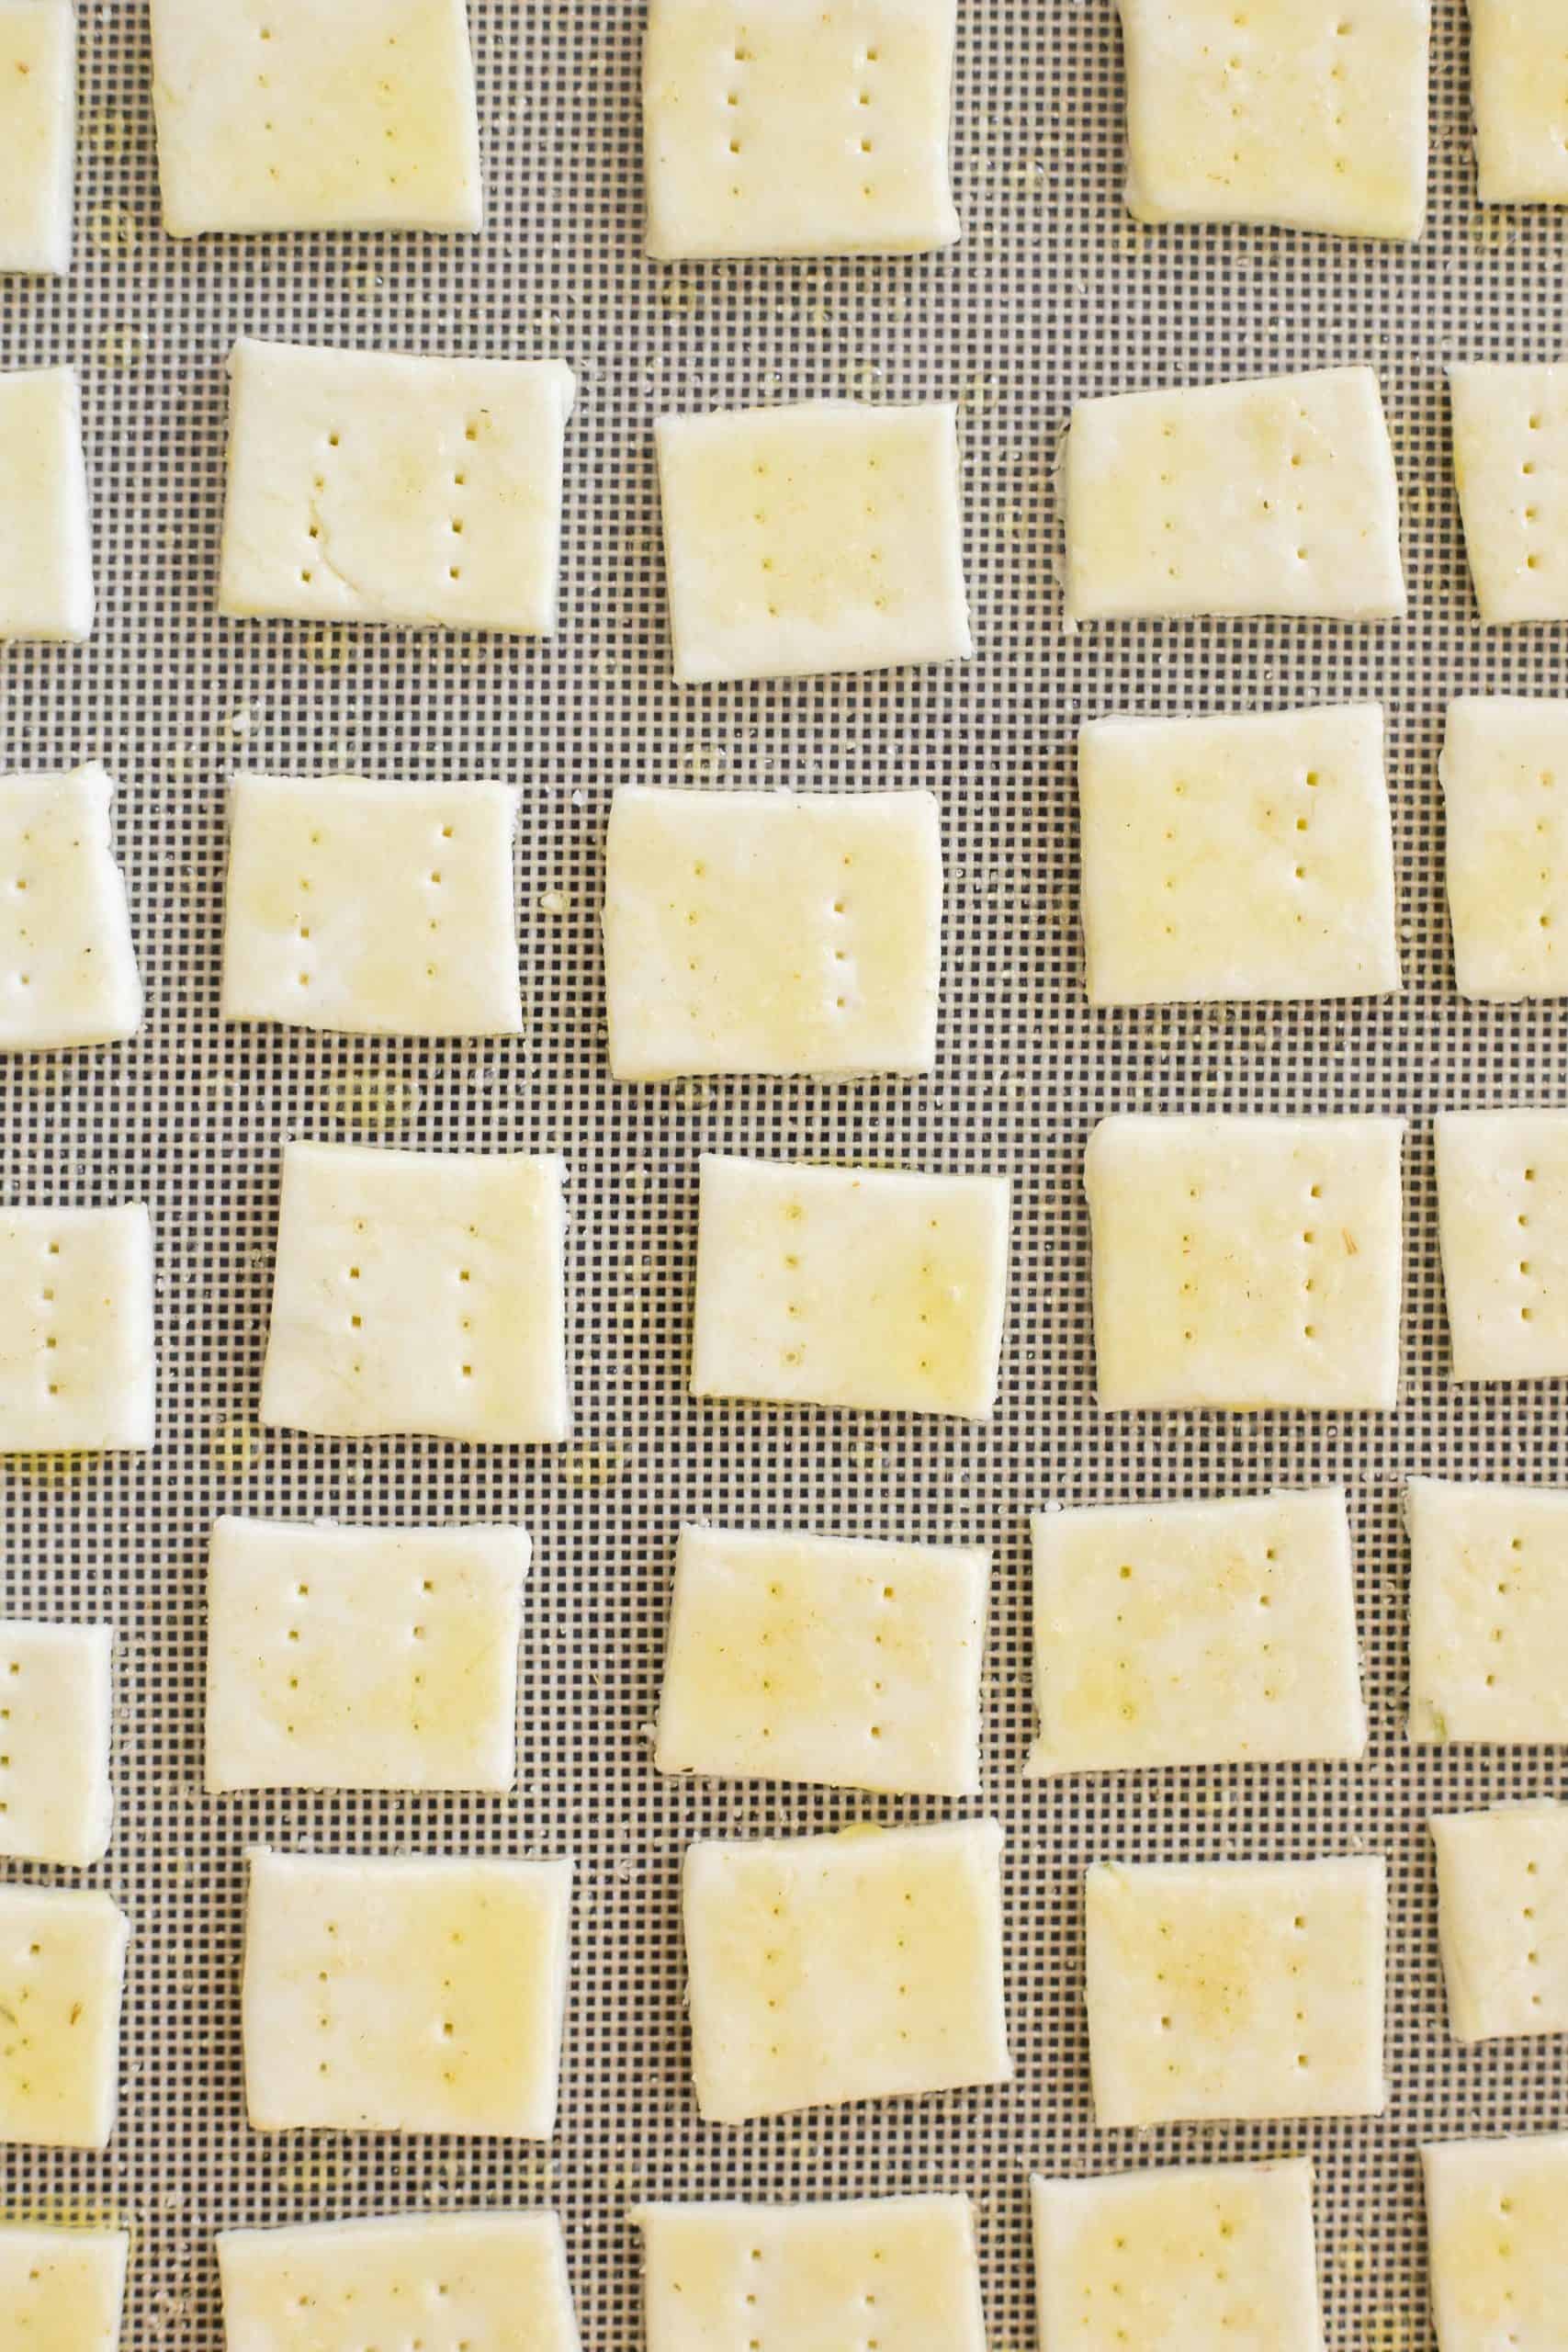 Cracker dough squares on a silpat-lined baking sheet.